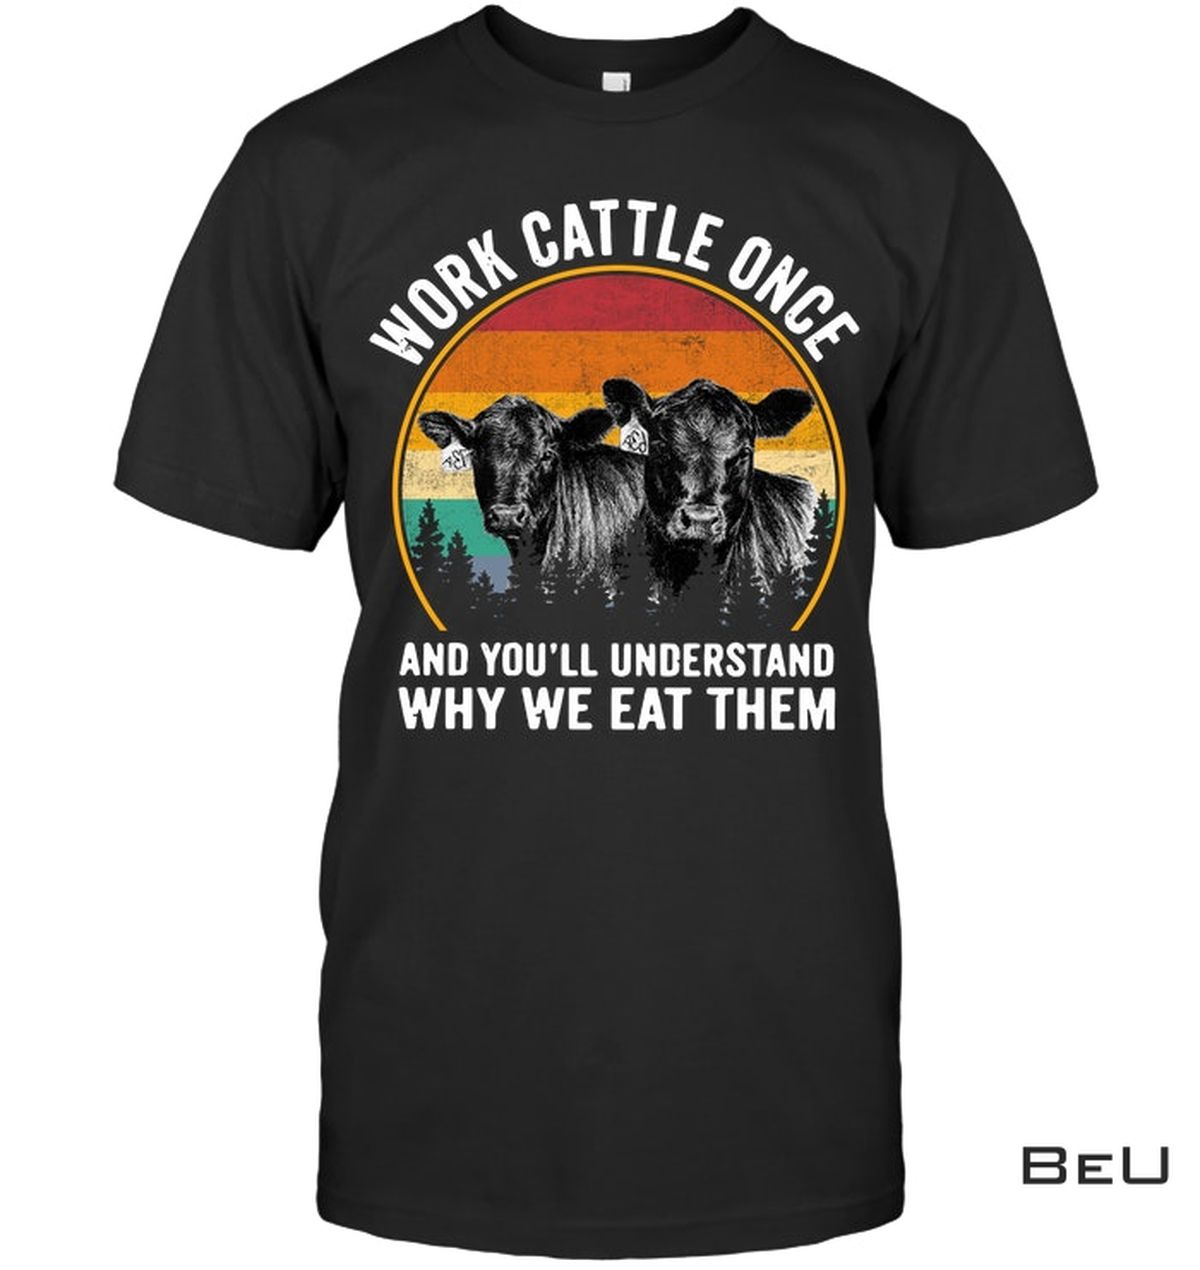 Work Castle Once And You Will Understand Why We Eat Them Shirt